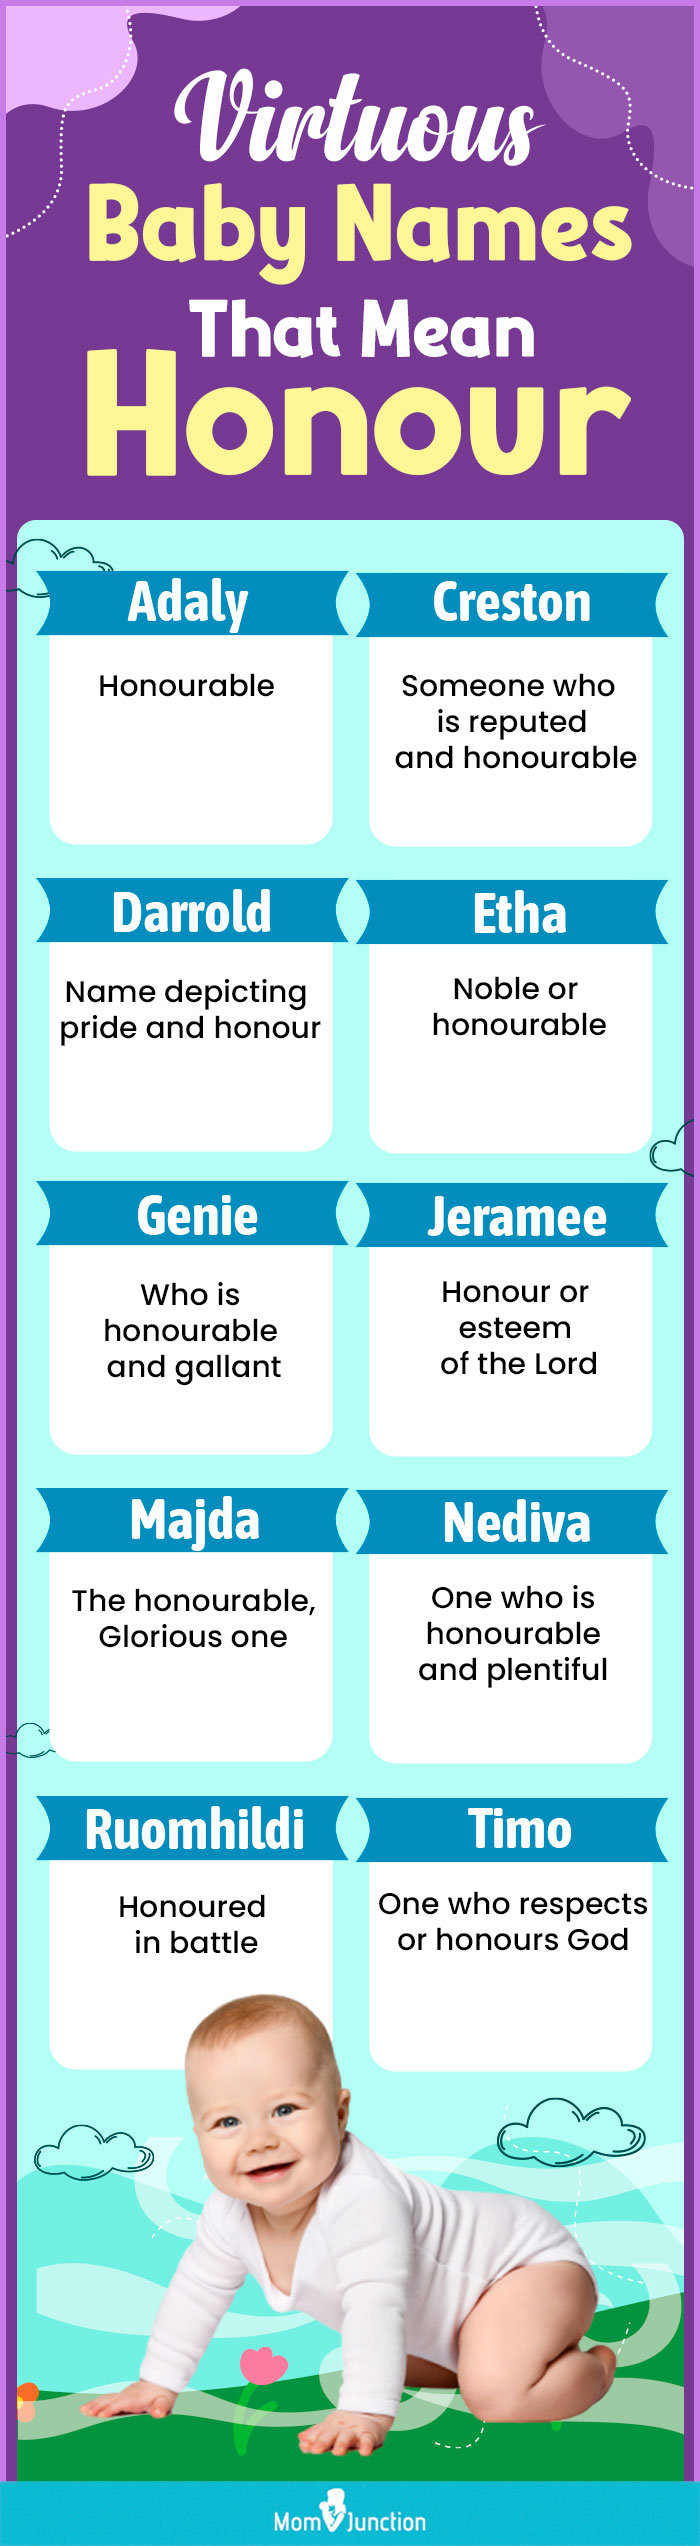 virtuous baby names that mean honour (infographic)